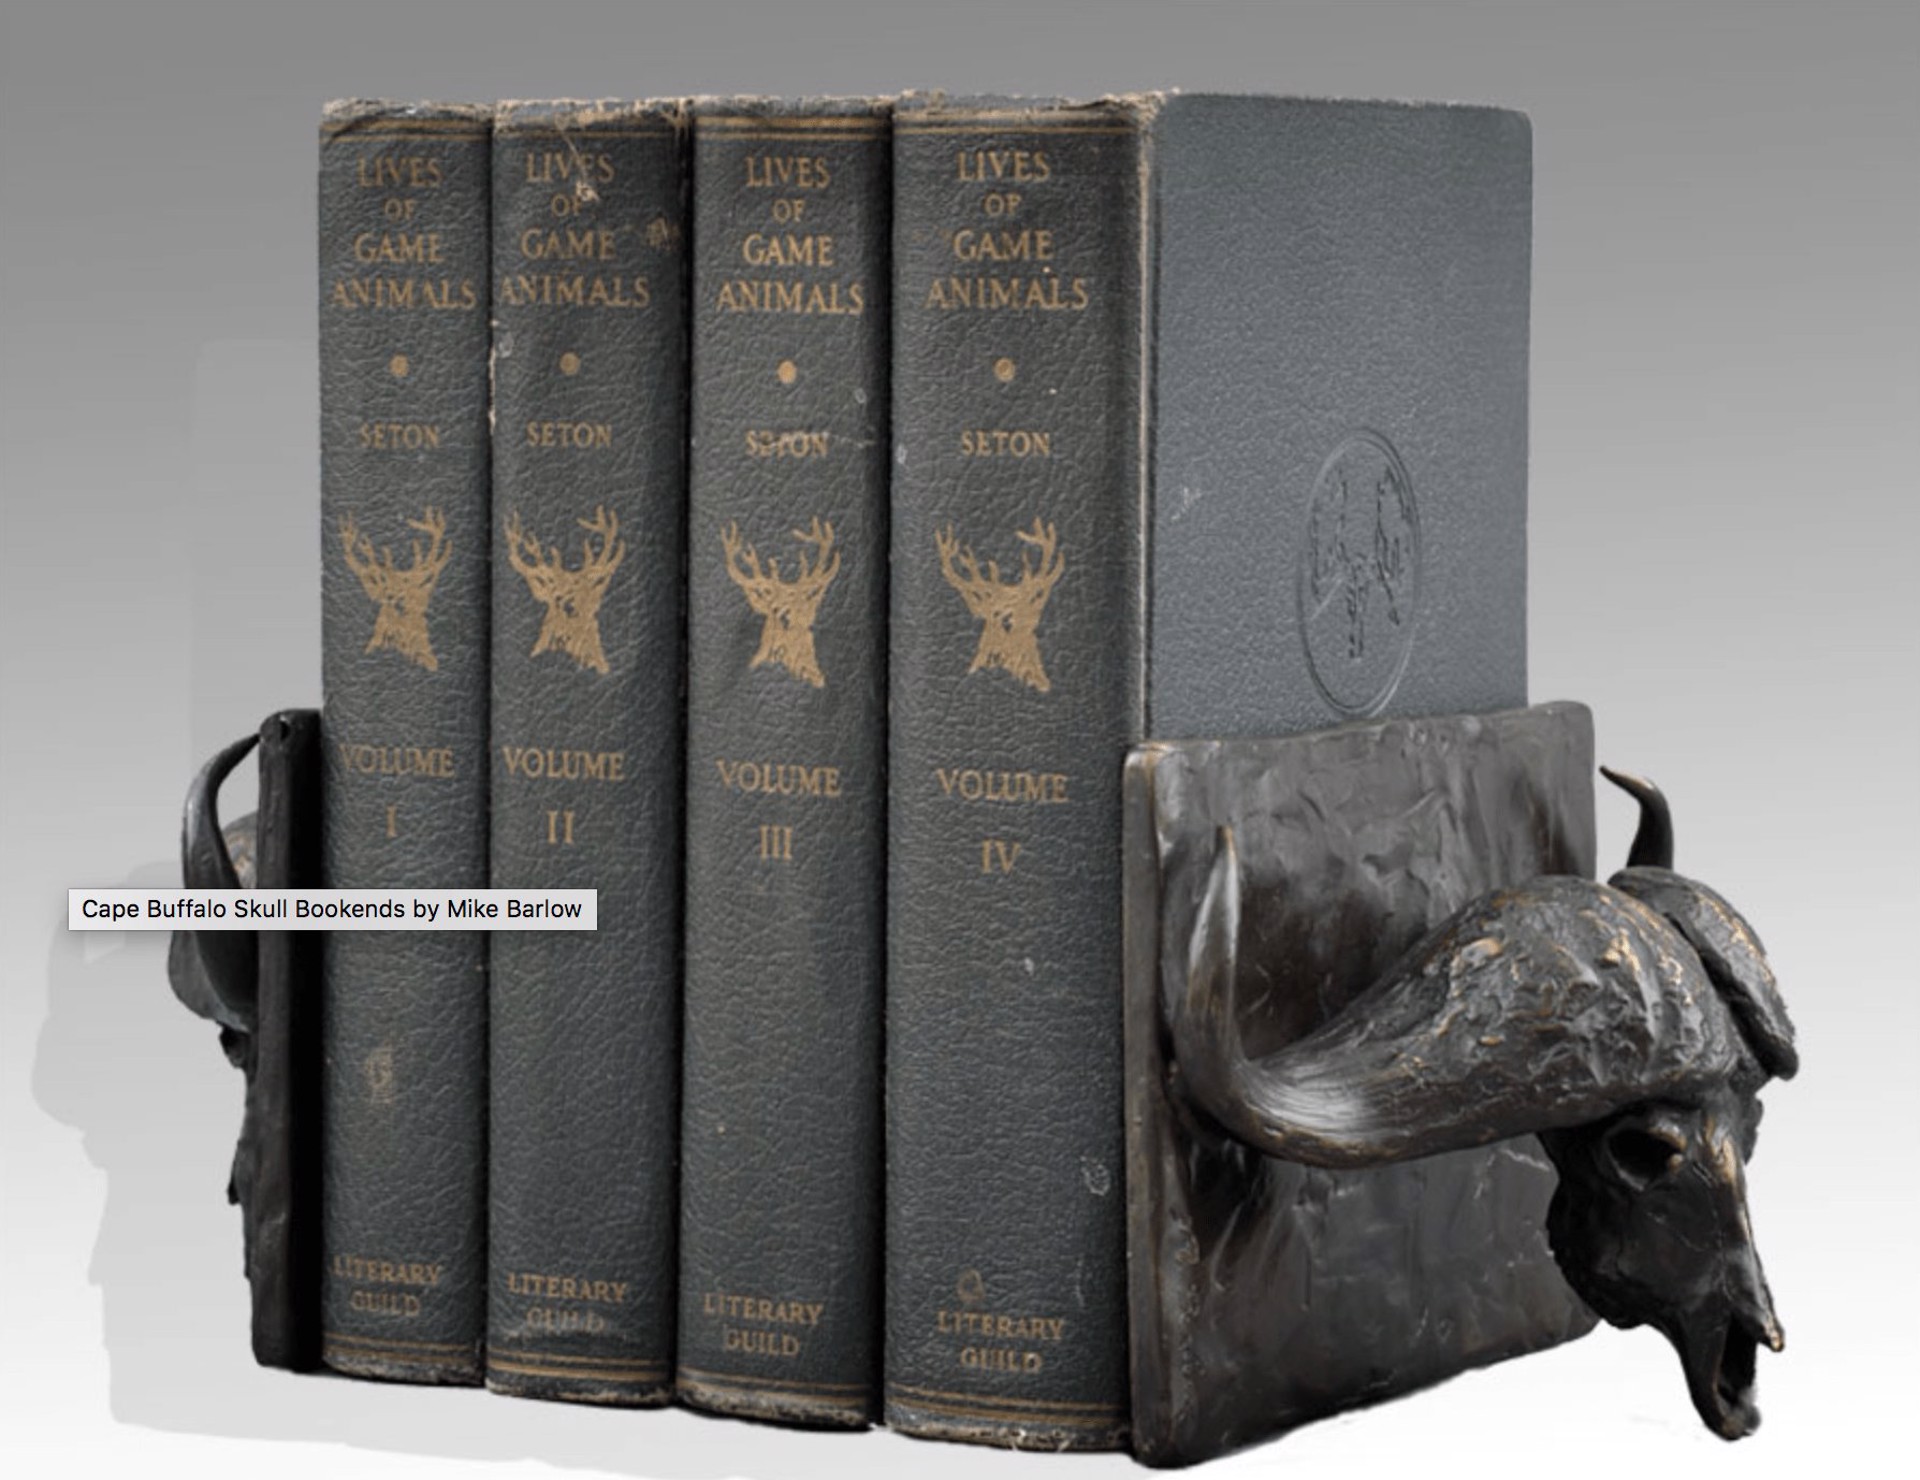 CAPE BUFFALO SKULL BOOKENDS by Mike Barlow